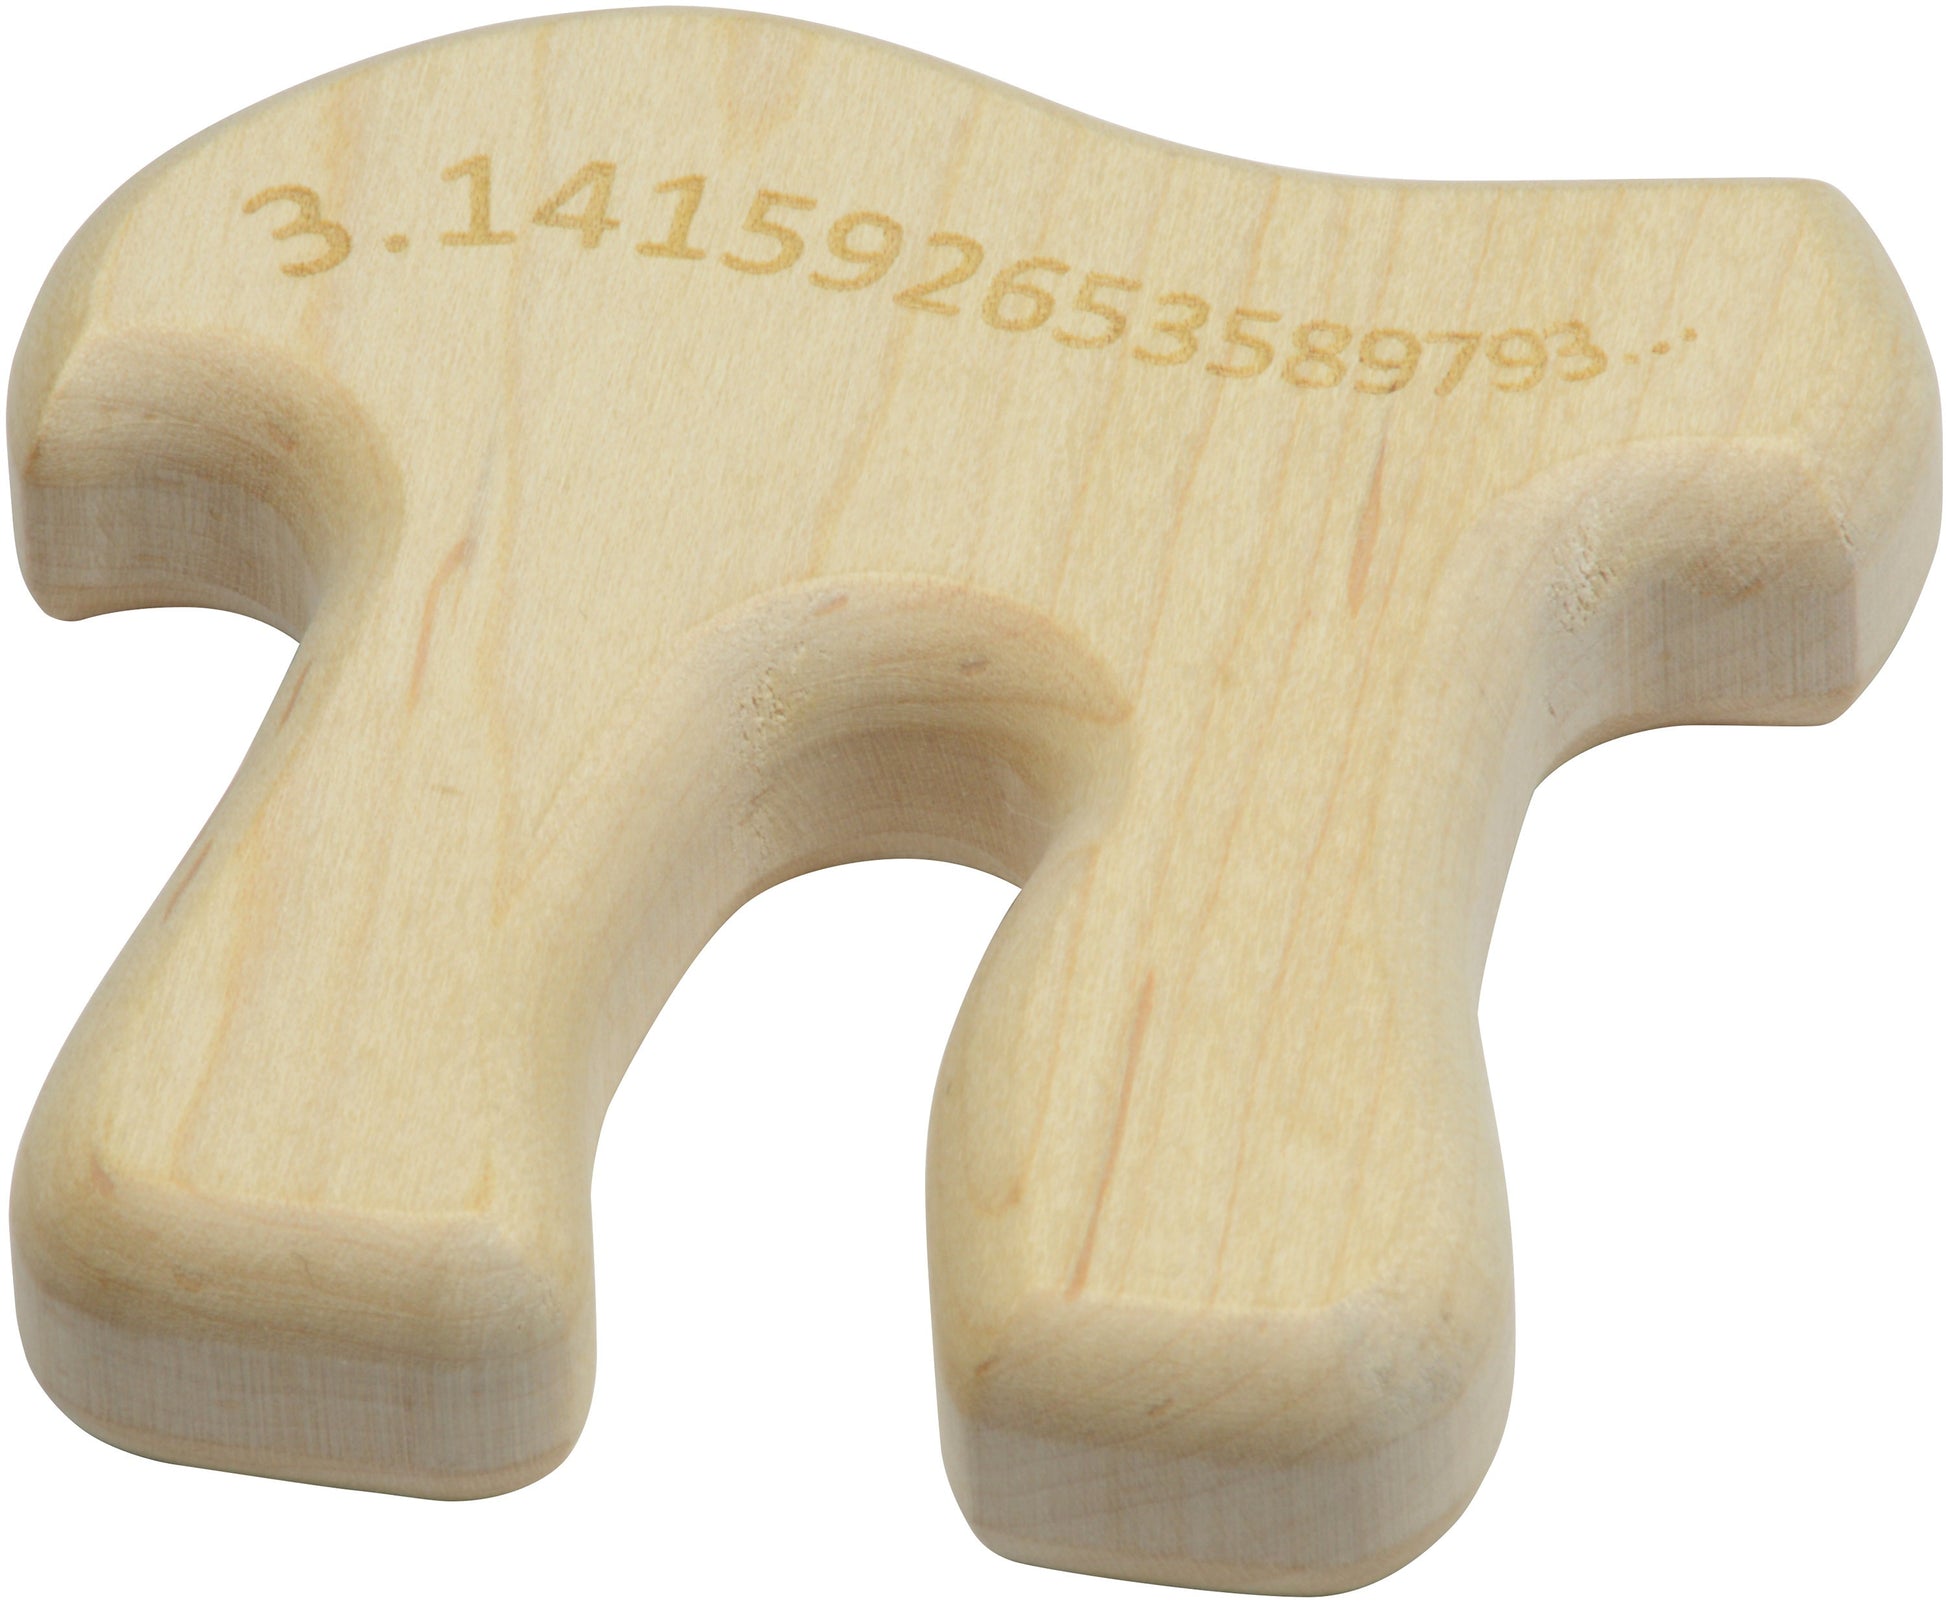 completely natural unfinished wood teether sanded smooth